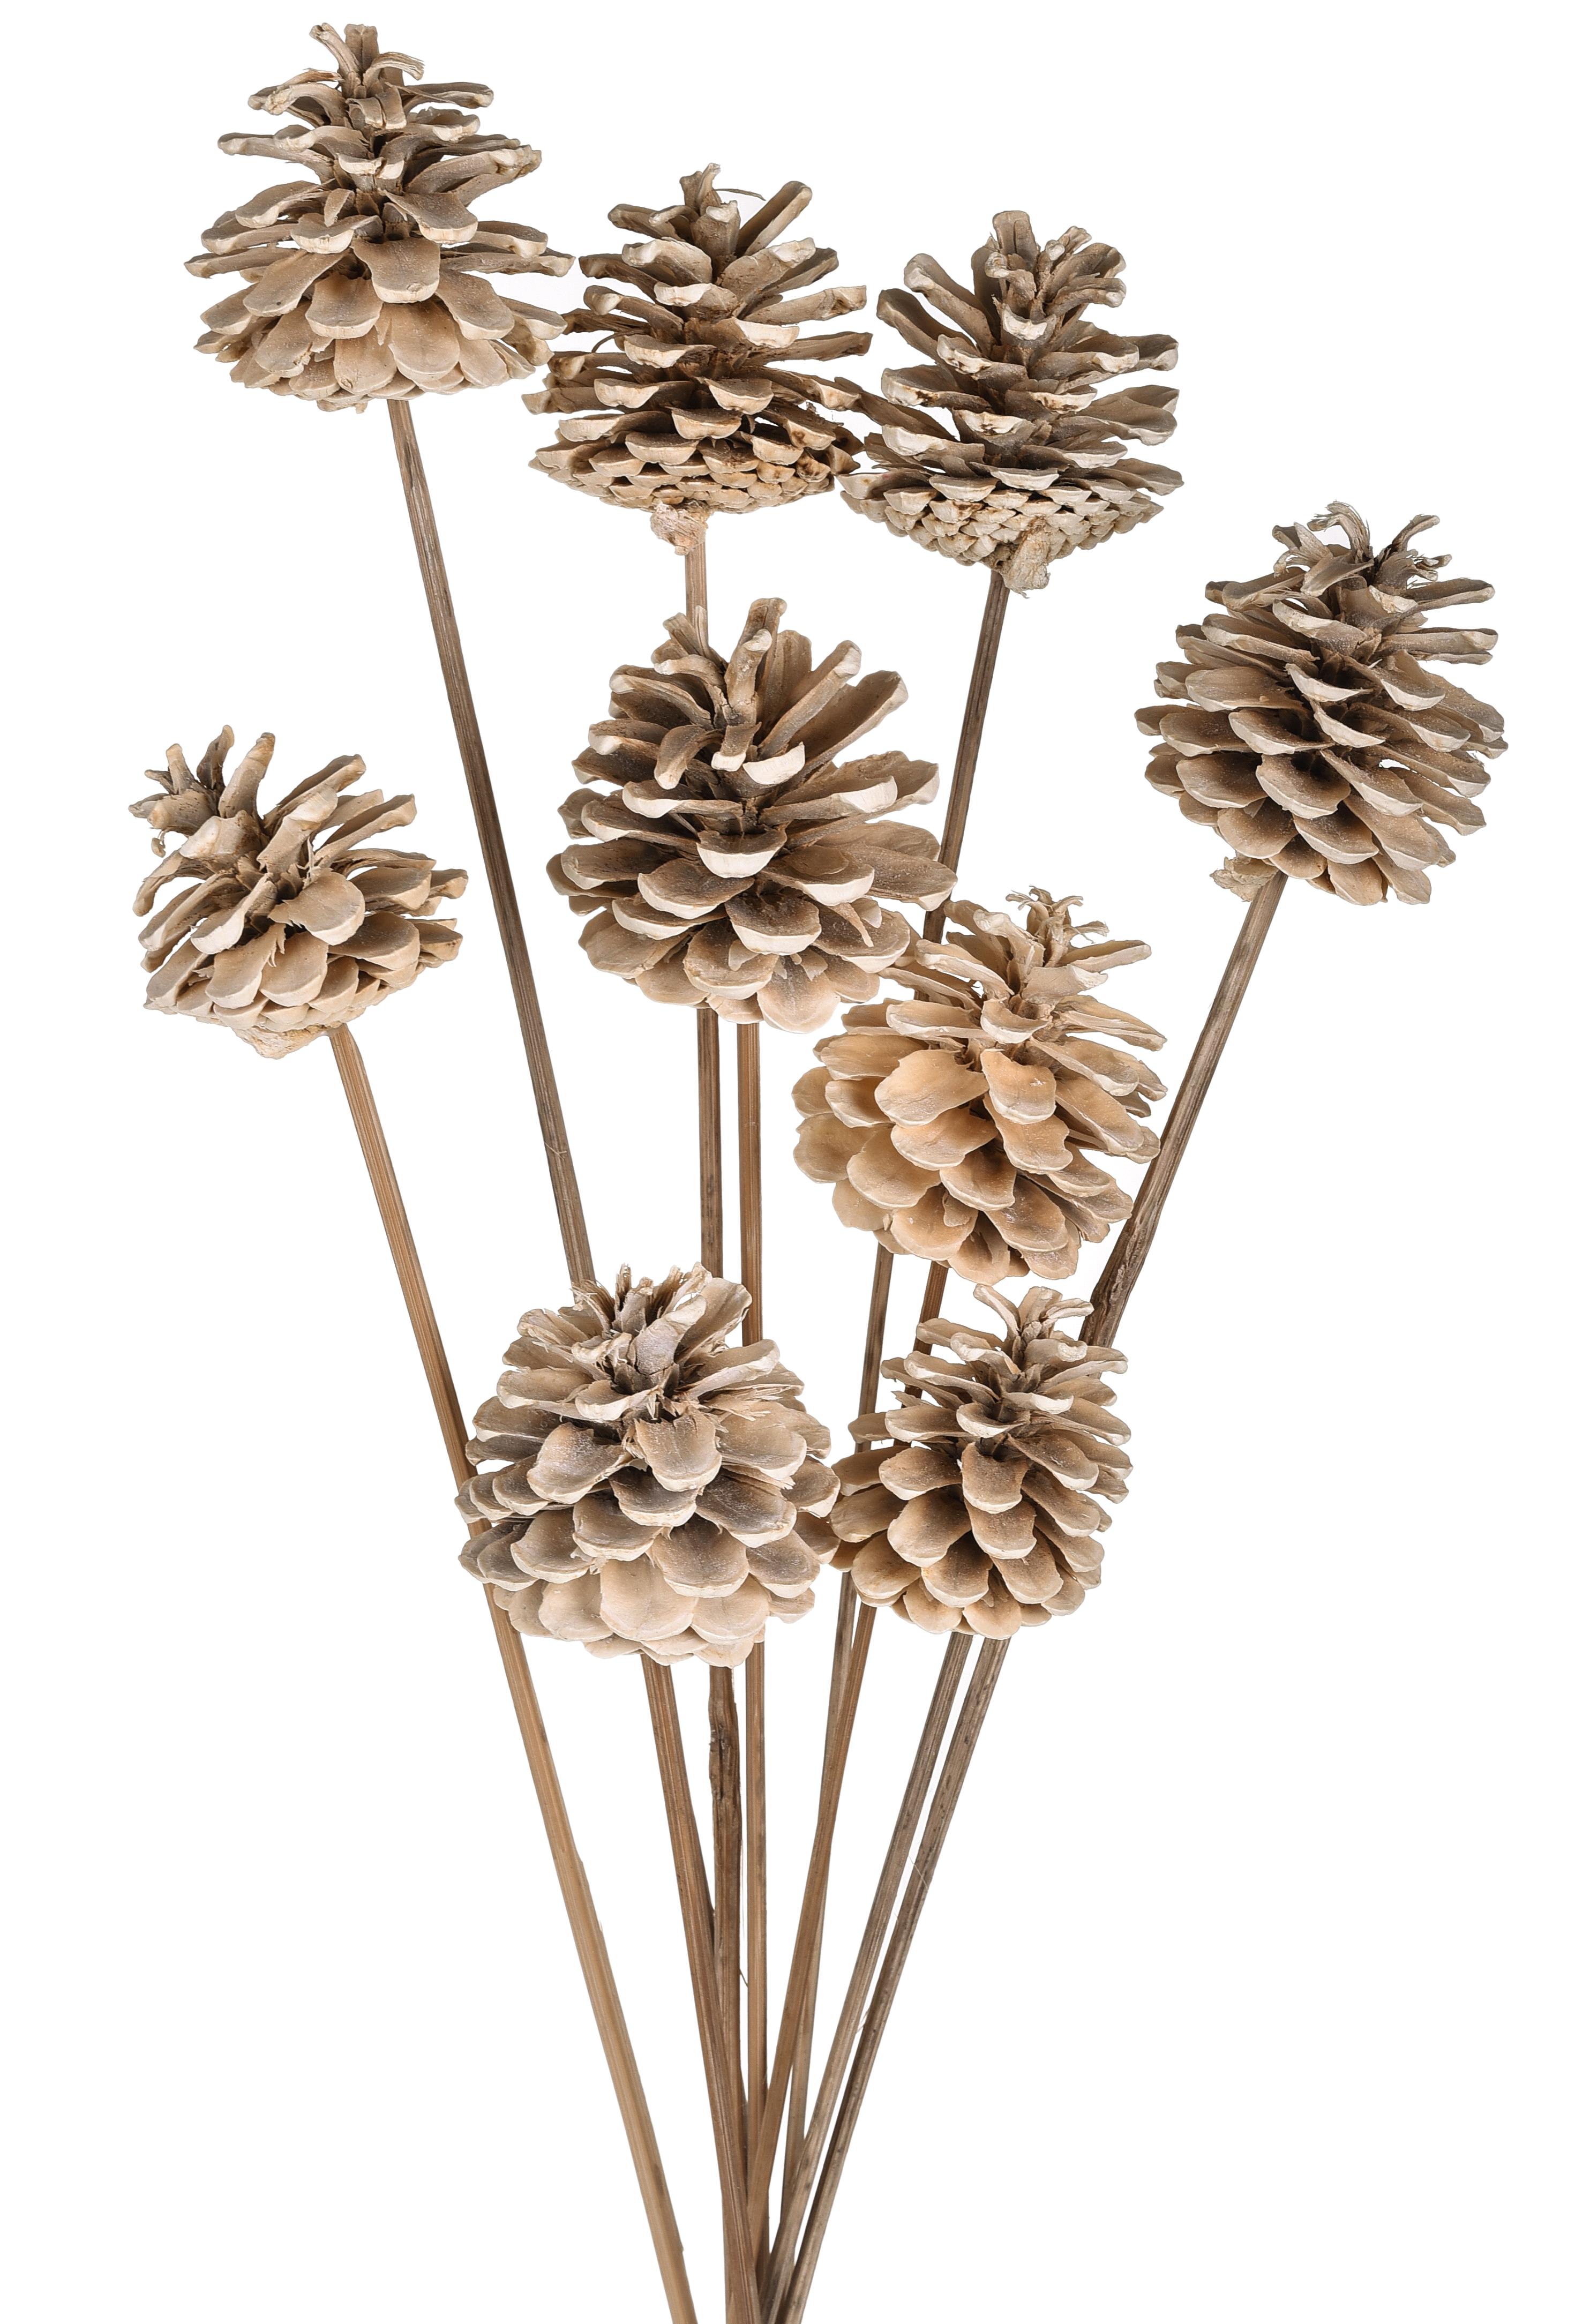 NATURAL PRODUCTS DRIED FLOWERS AND ERBS, Cones and fruits with stem, PINE GAMBATE 9 PZ 70 CM SBIANCATE